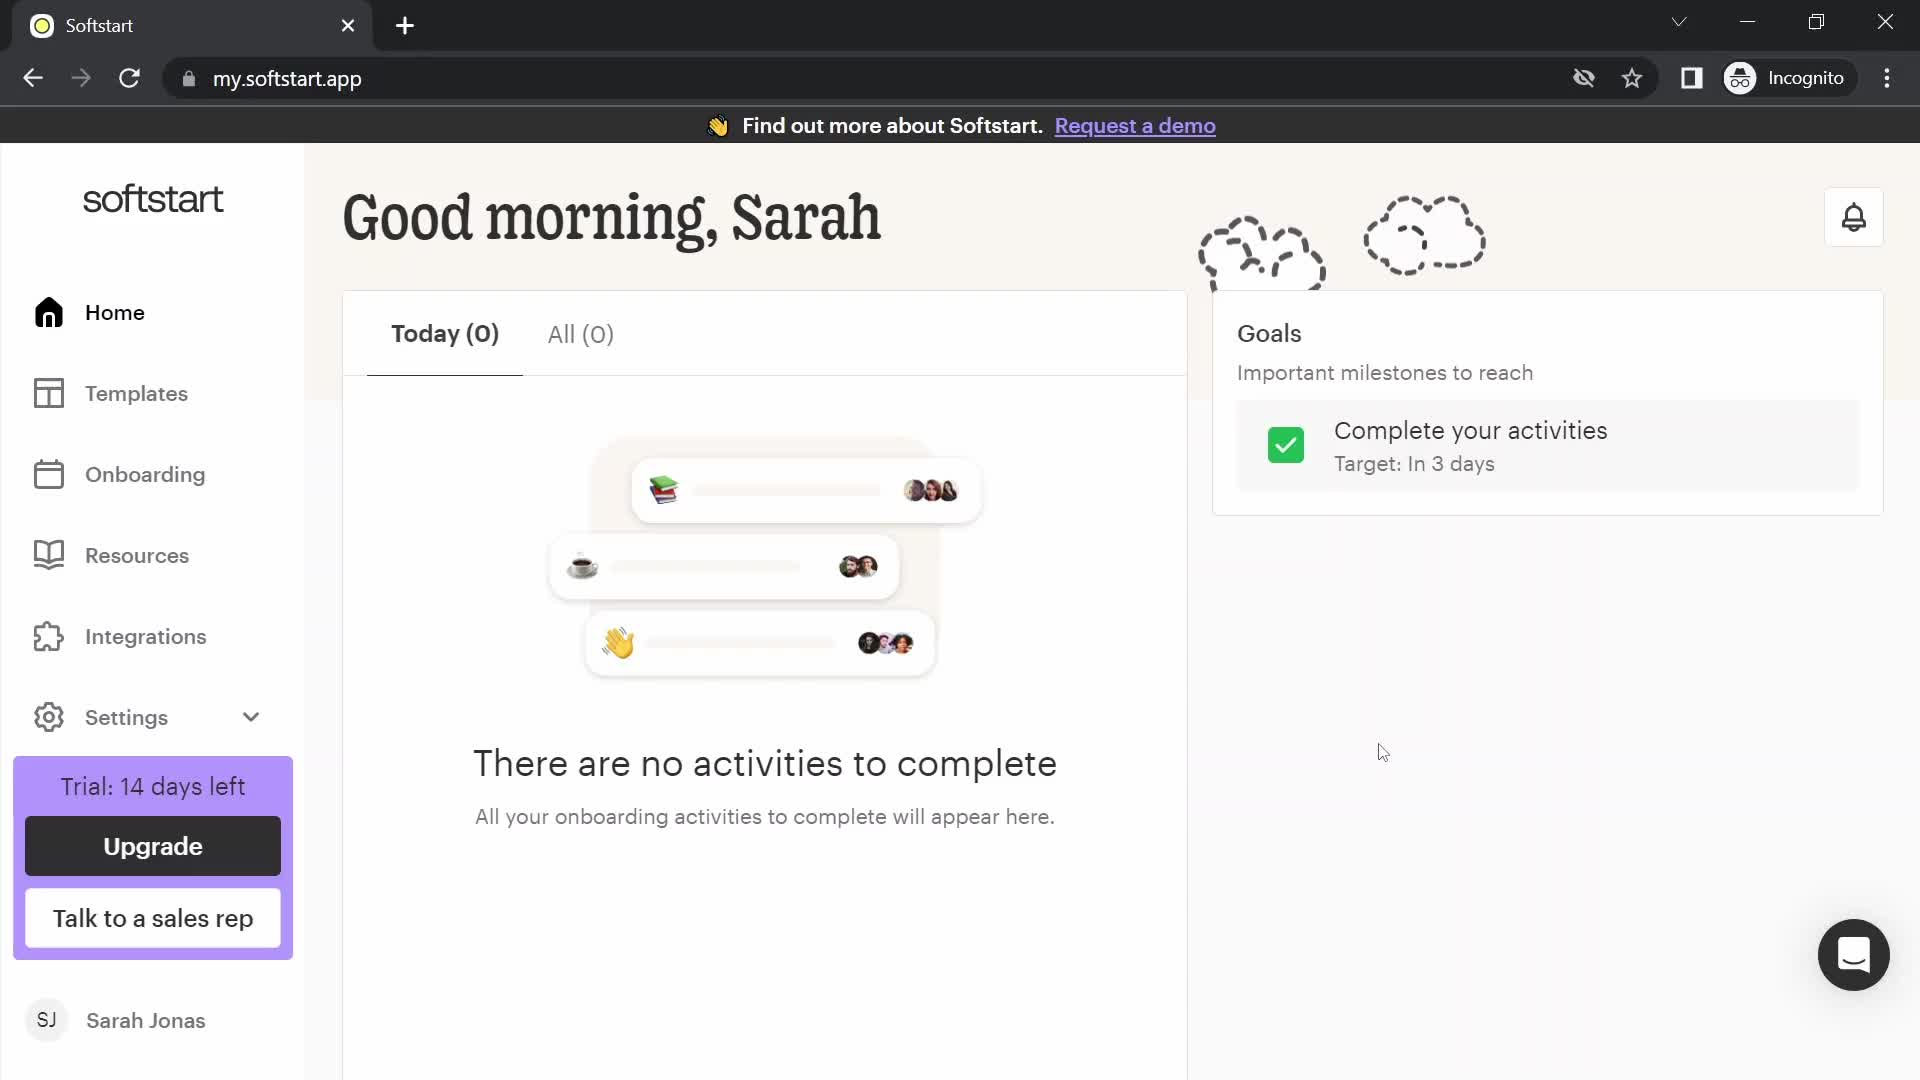 Screenshot of Home on Inviting people on Softstart user flow